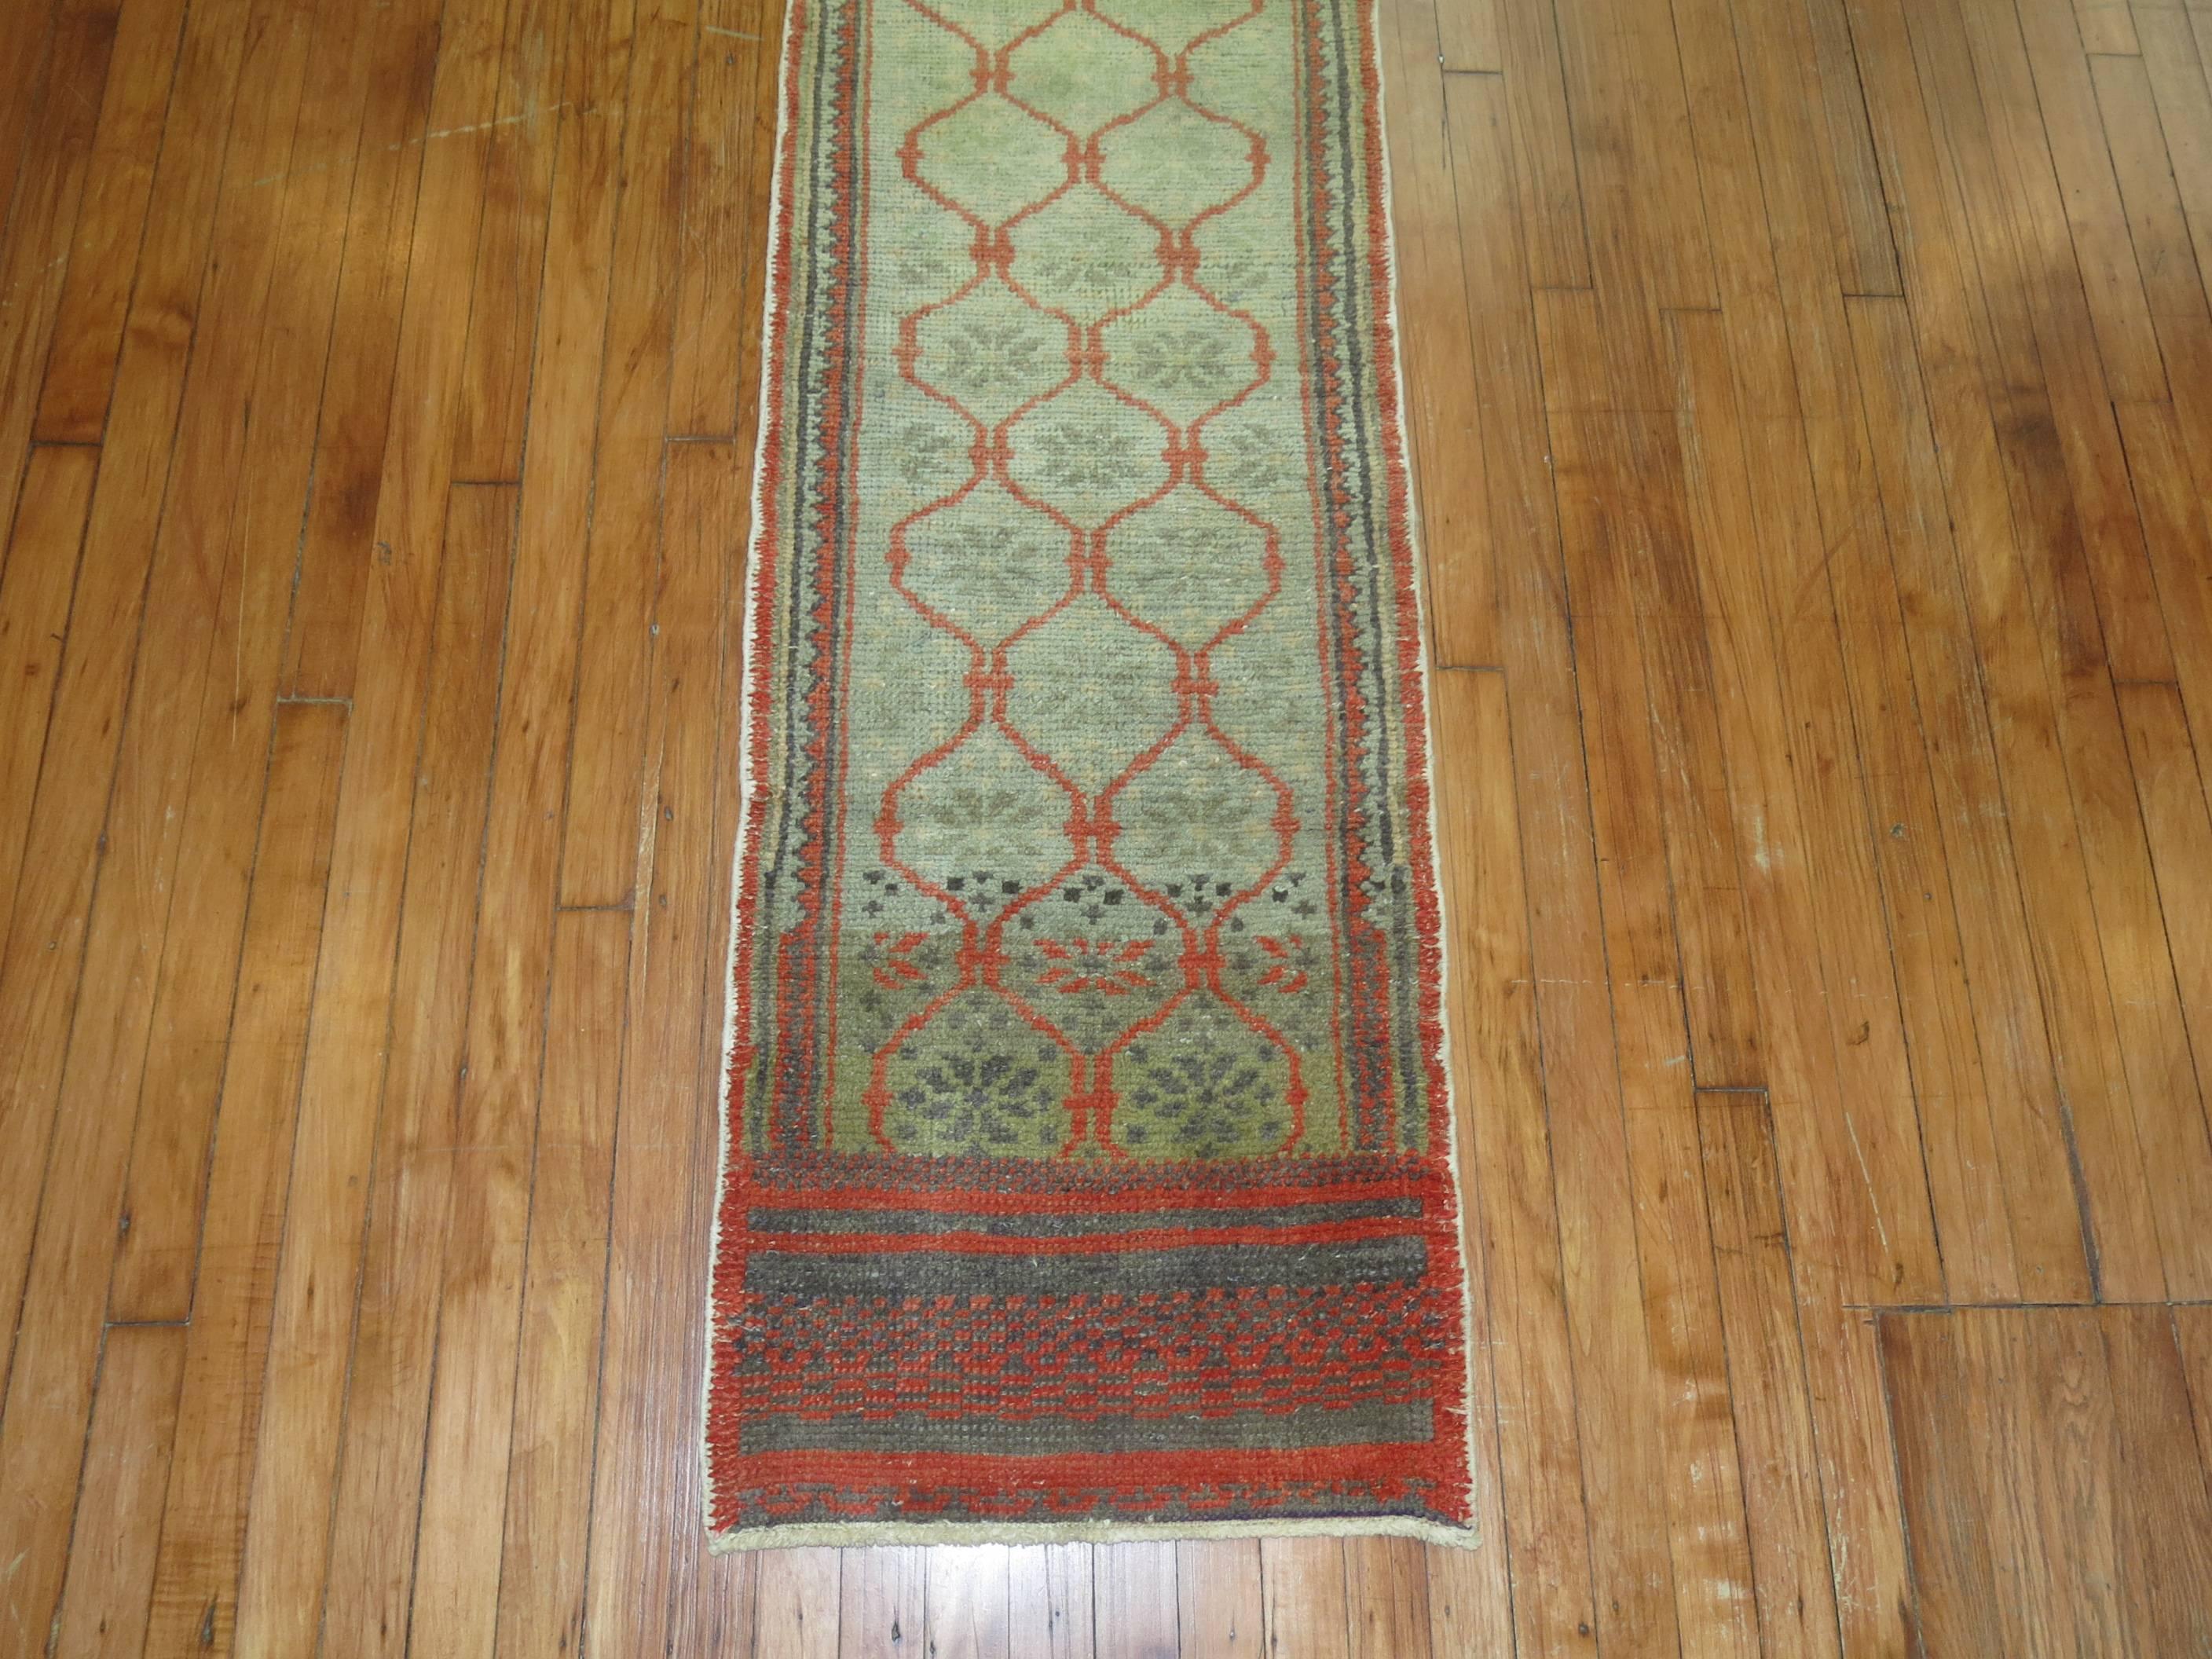 Narrow one of a kind vintage Turkish runner featuring an all-over motif in red on a sea green background.

Measures: 1'10